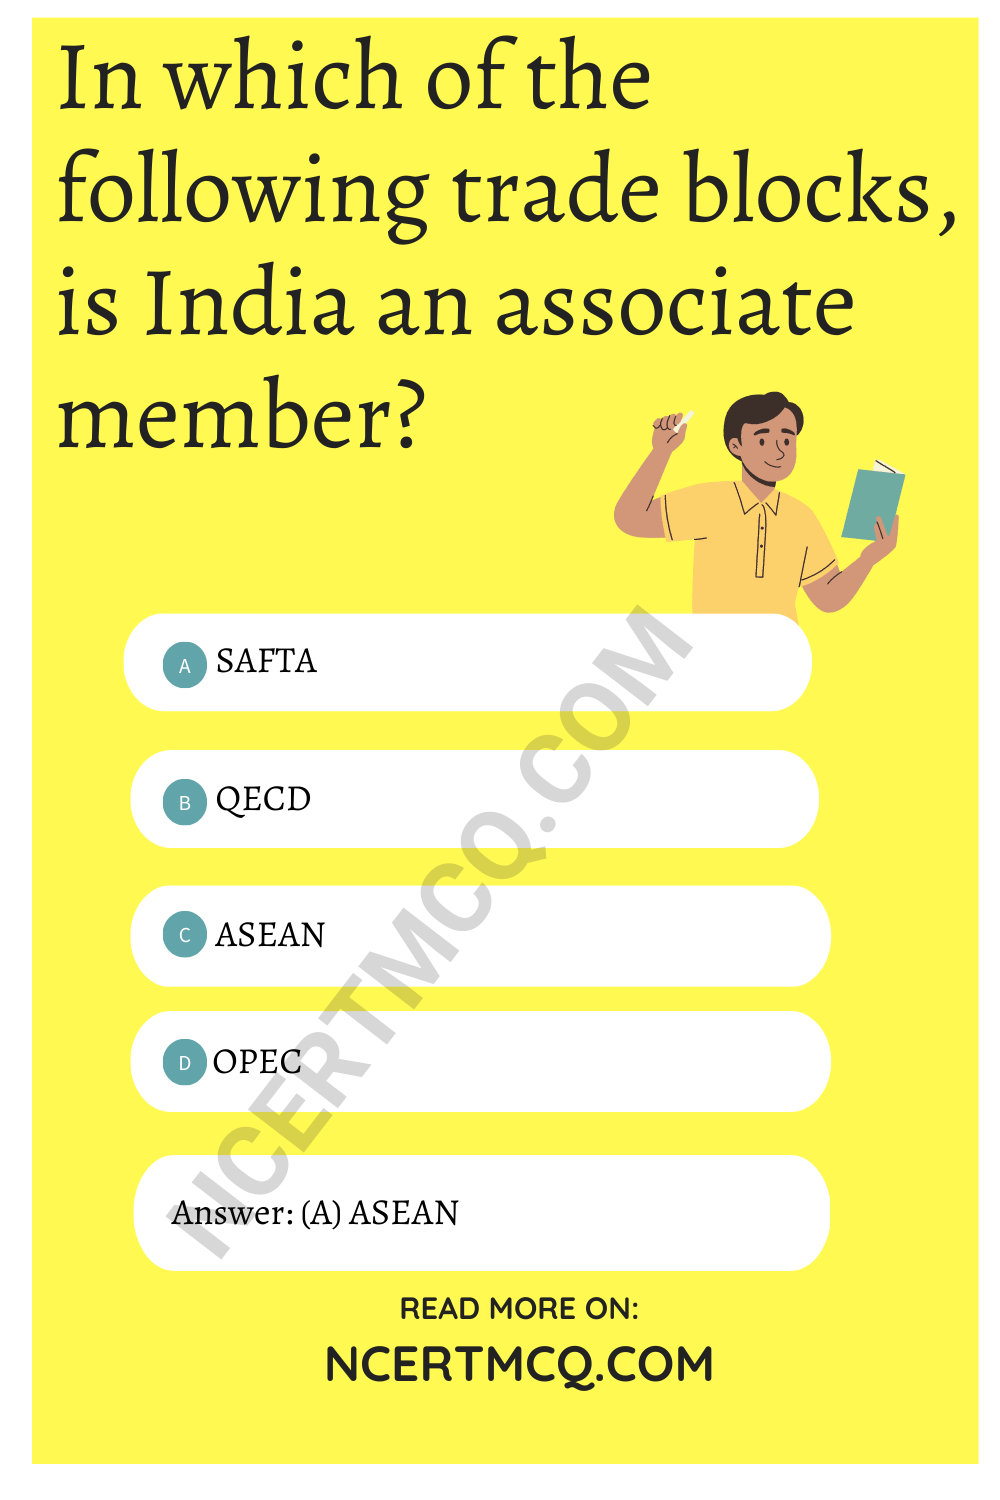 In which of the following trade blocks, is India an associate member?